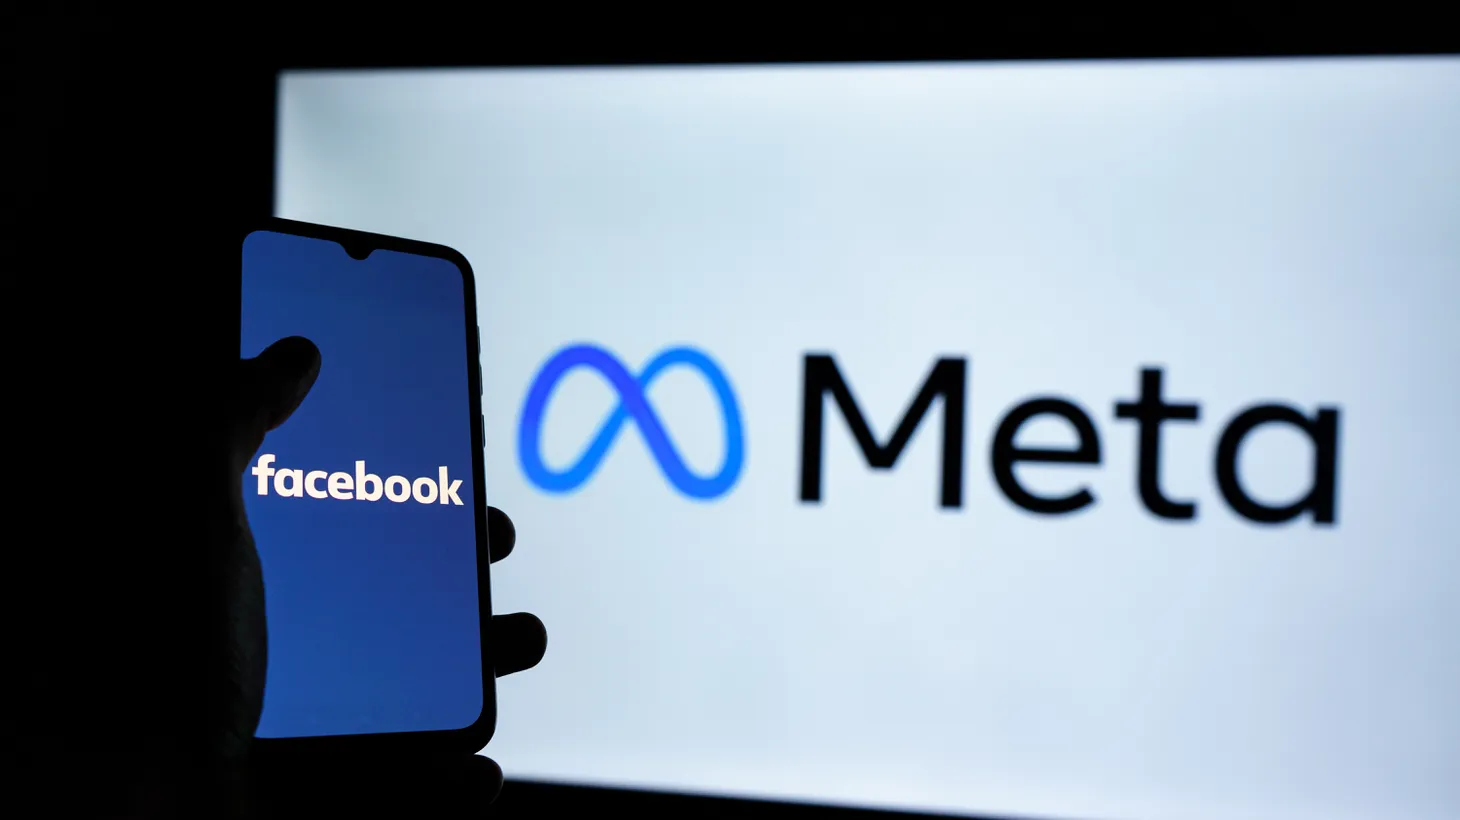 Meta’s value has crashed multiple times since January, following Facebook’s loss of daily active users.